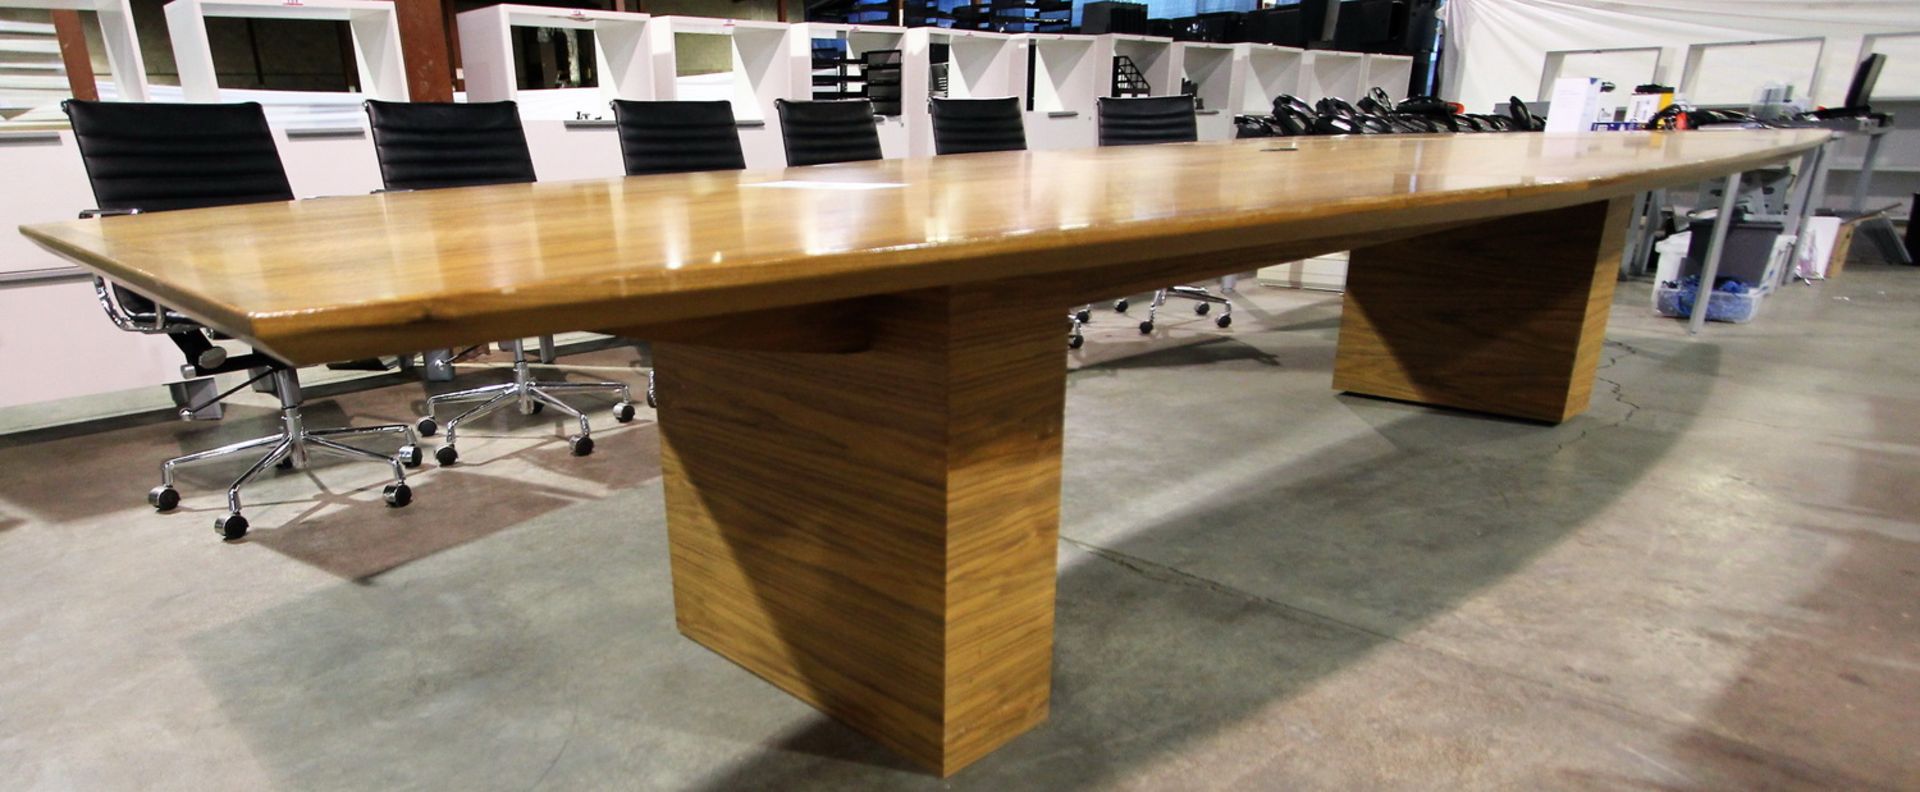 14' X 63"W (AT CENTRE) 43"W (AT ENDS) BOARDROOM TABLE W/ POWER & INTERNET CONNECTION BOX - Bild 5 aus 6